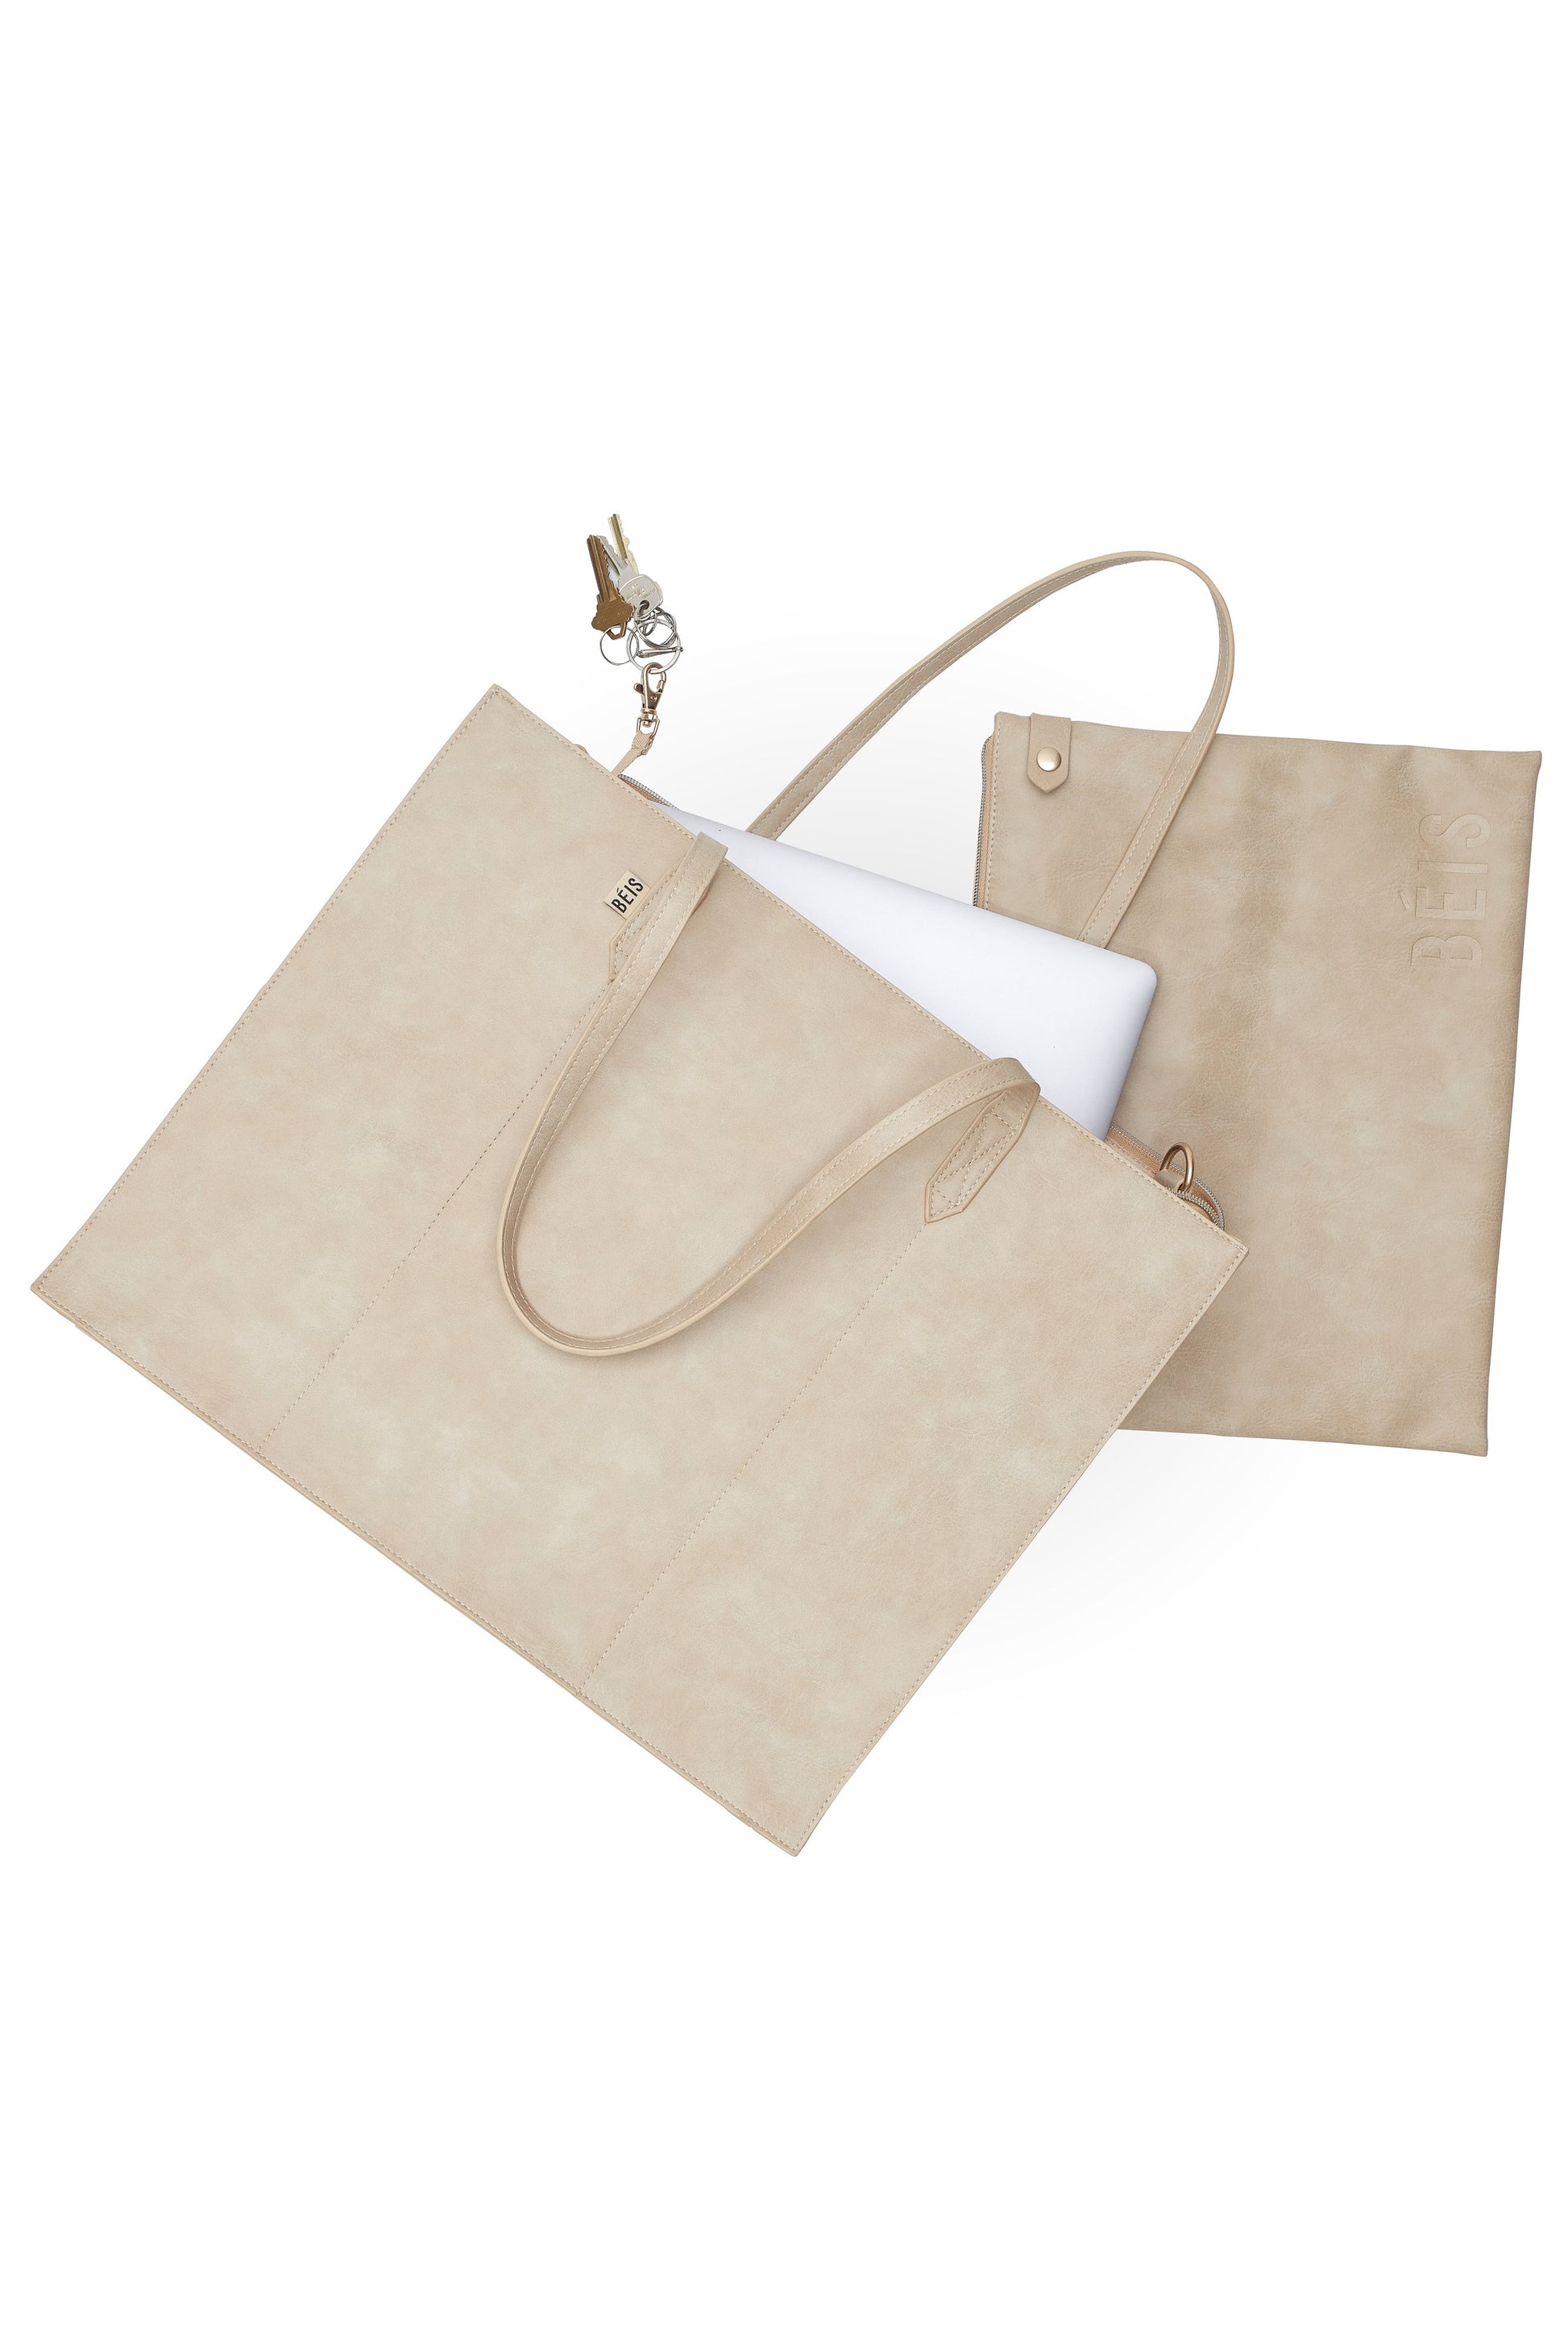 Work Tote Beige Front with Laptop Keys and Removable Pouch